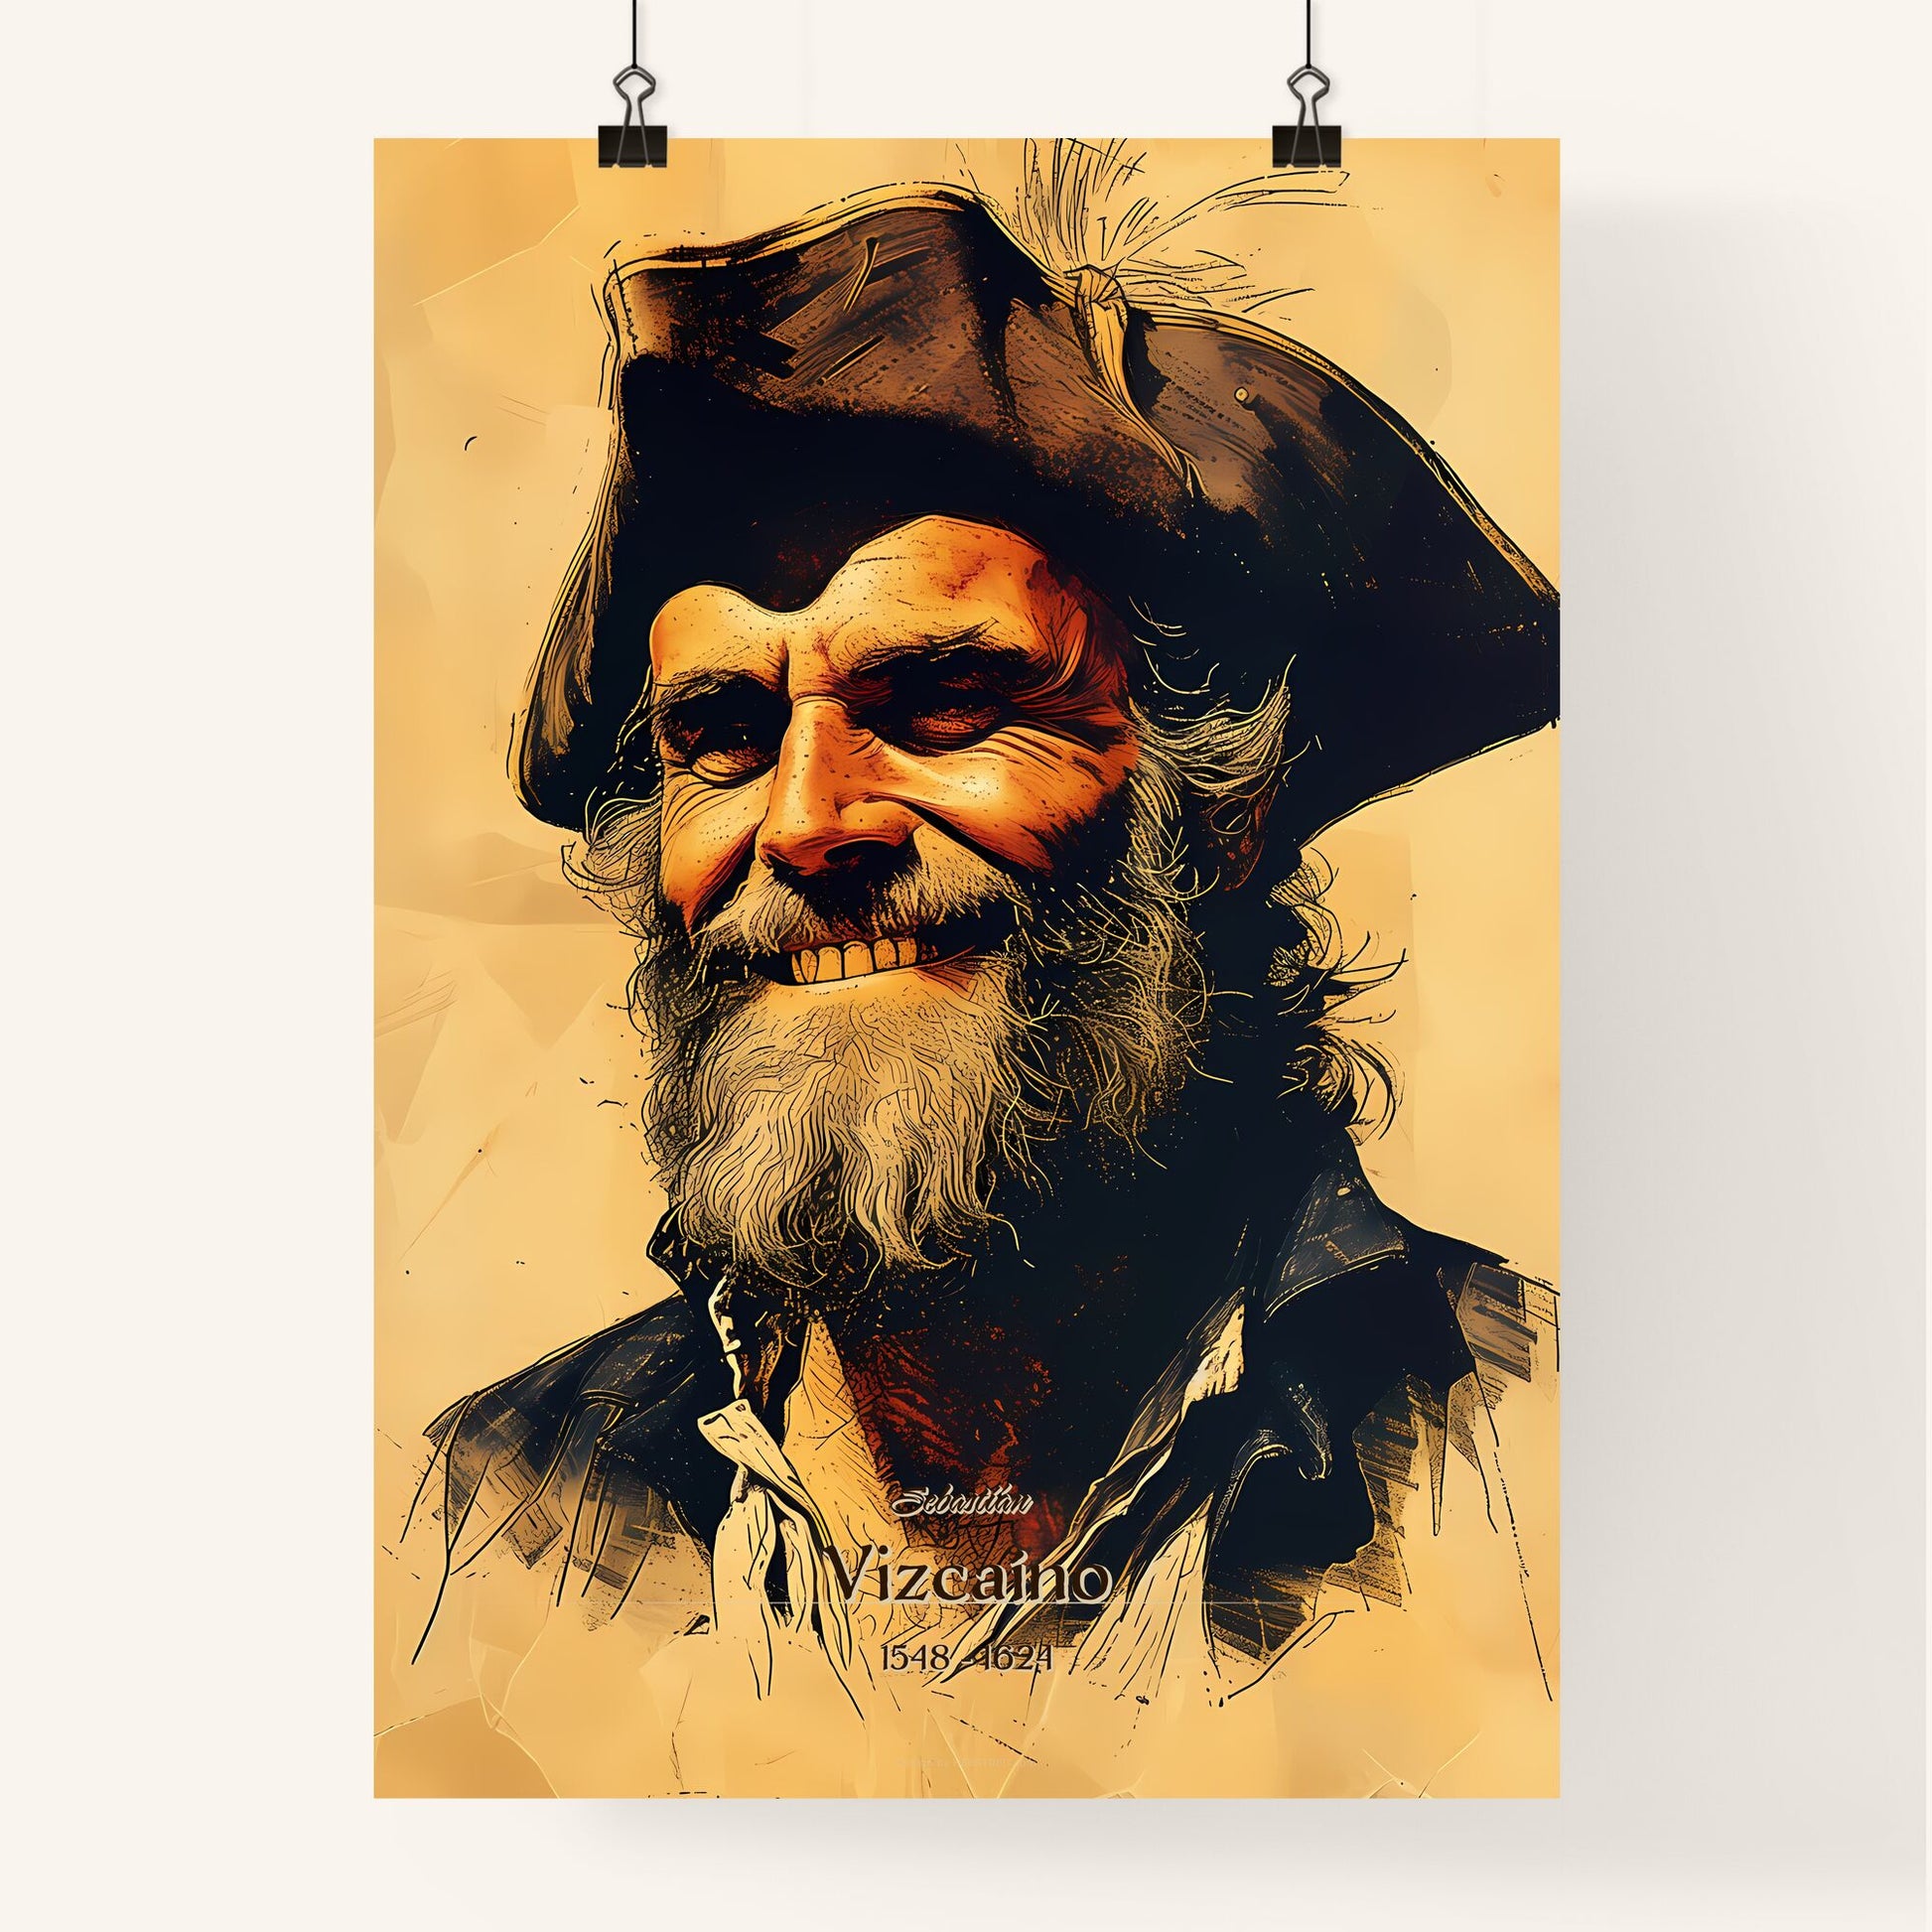 Sebastián, Vizcaíno, 1548 - 1624, A Poster of a man with a beard and mustache wearing a pirate hat Default Title